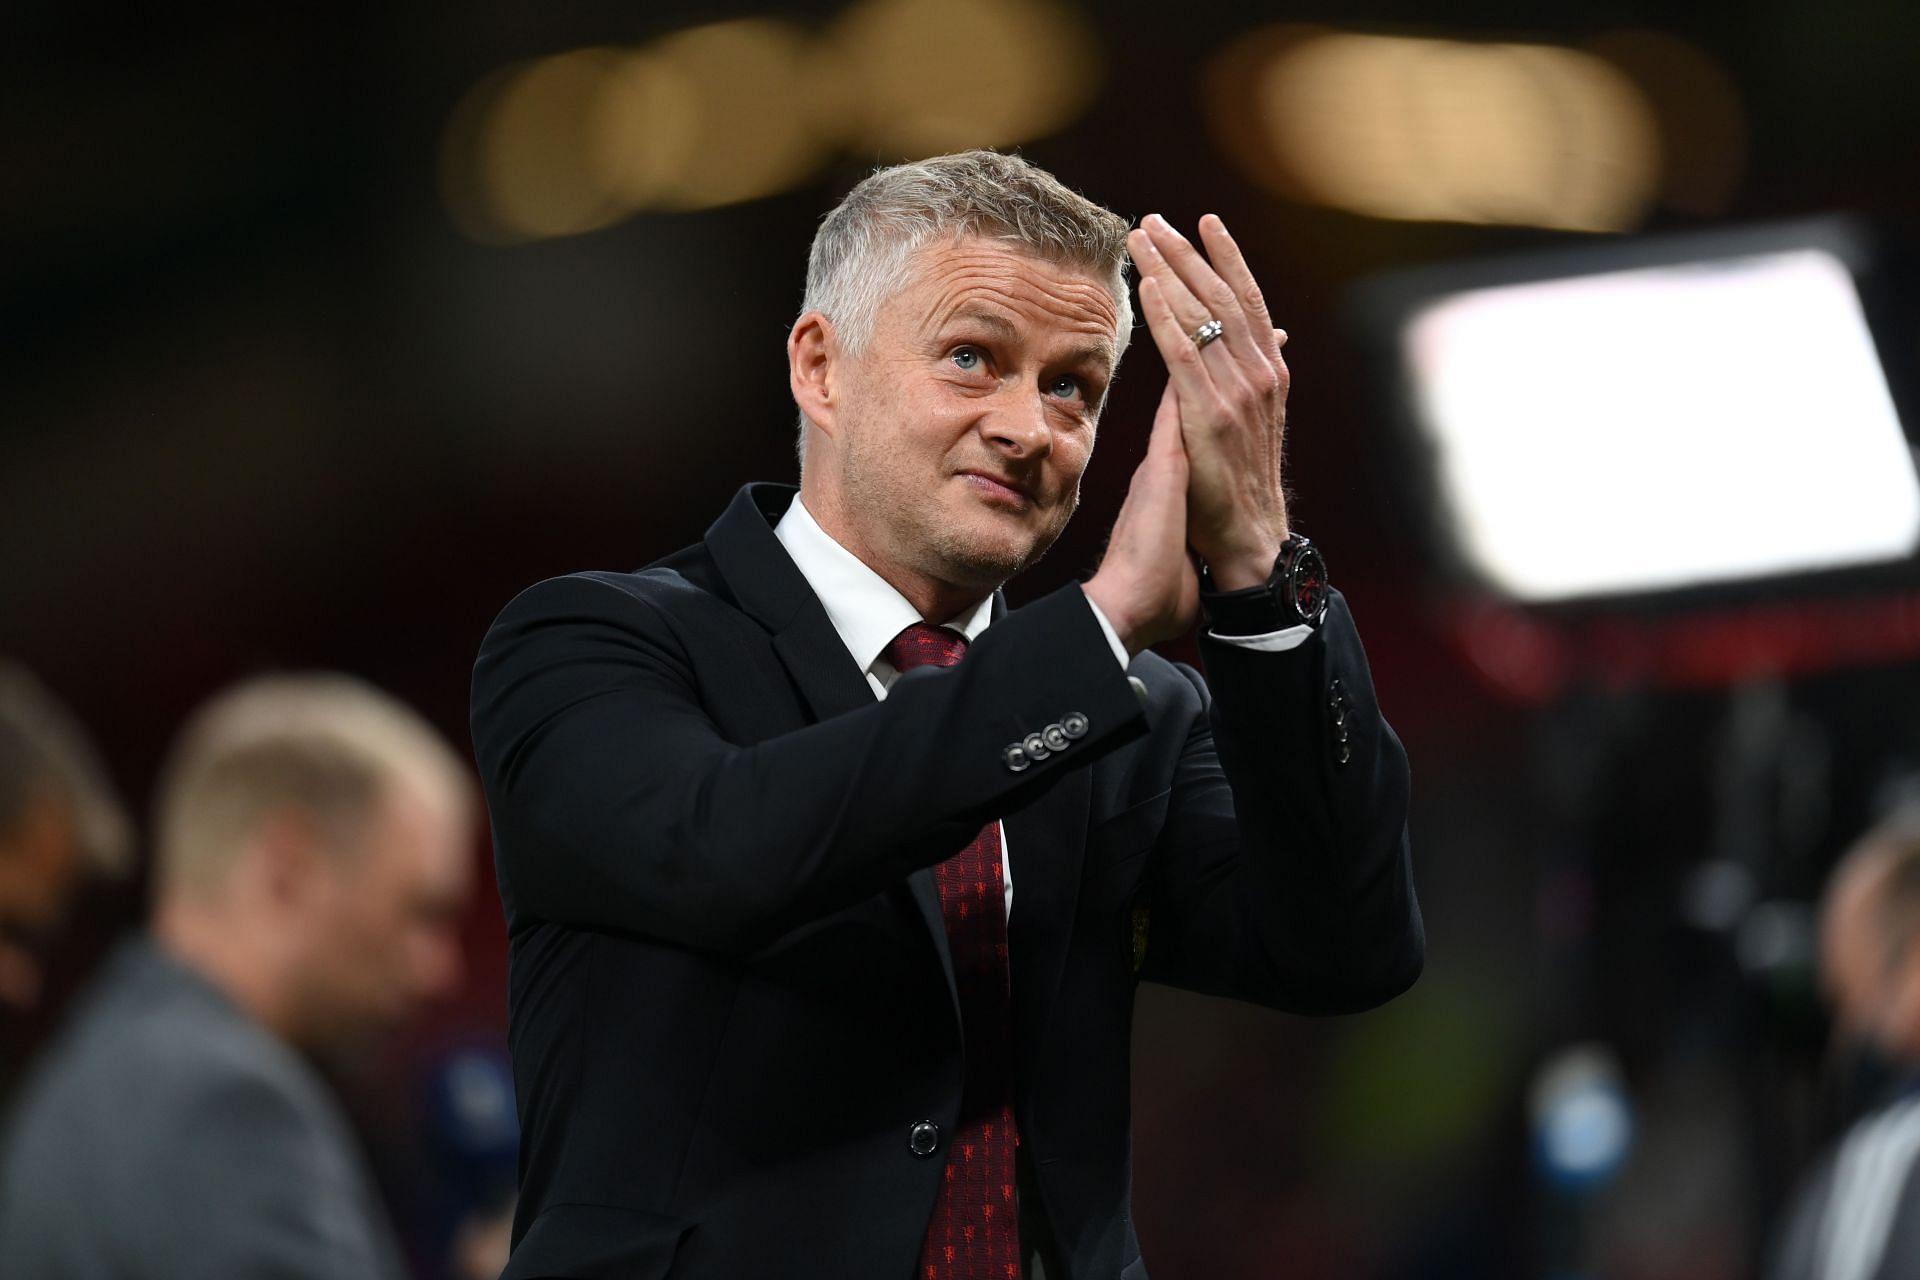 Manchester United have confirmed that they have parted ways with Ole Gunnar Solskjaer.